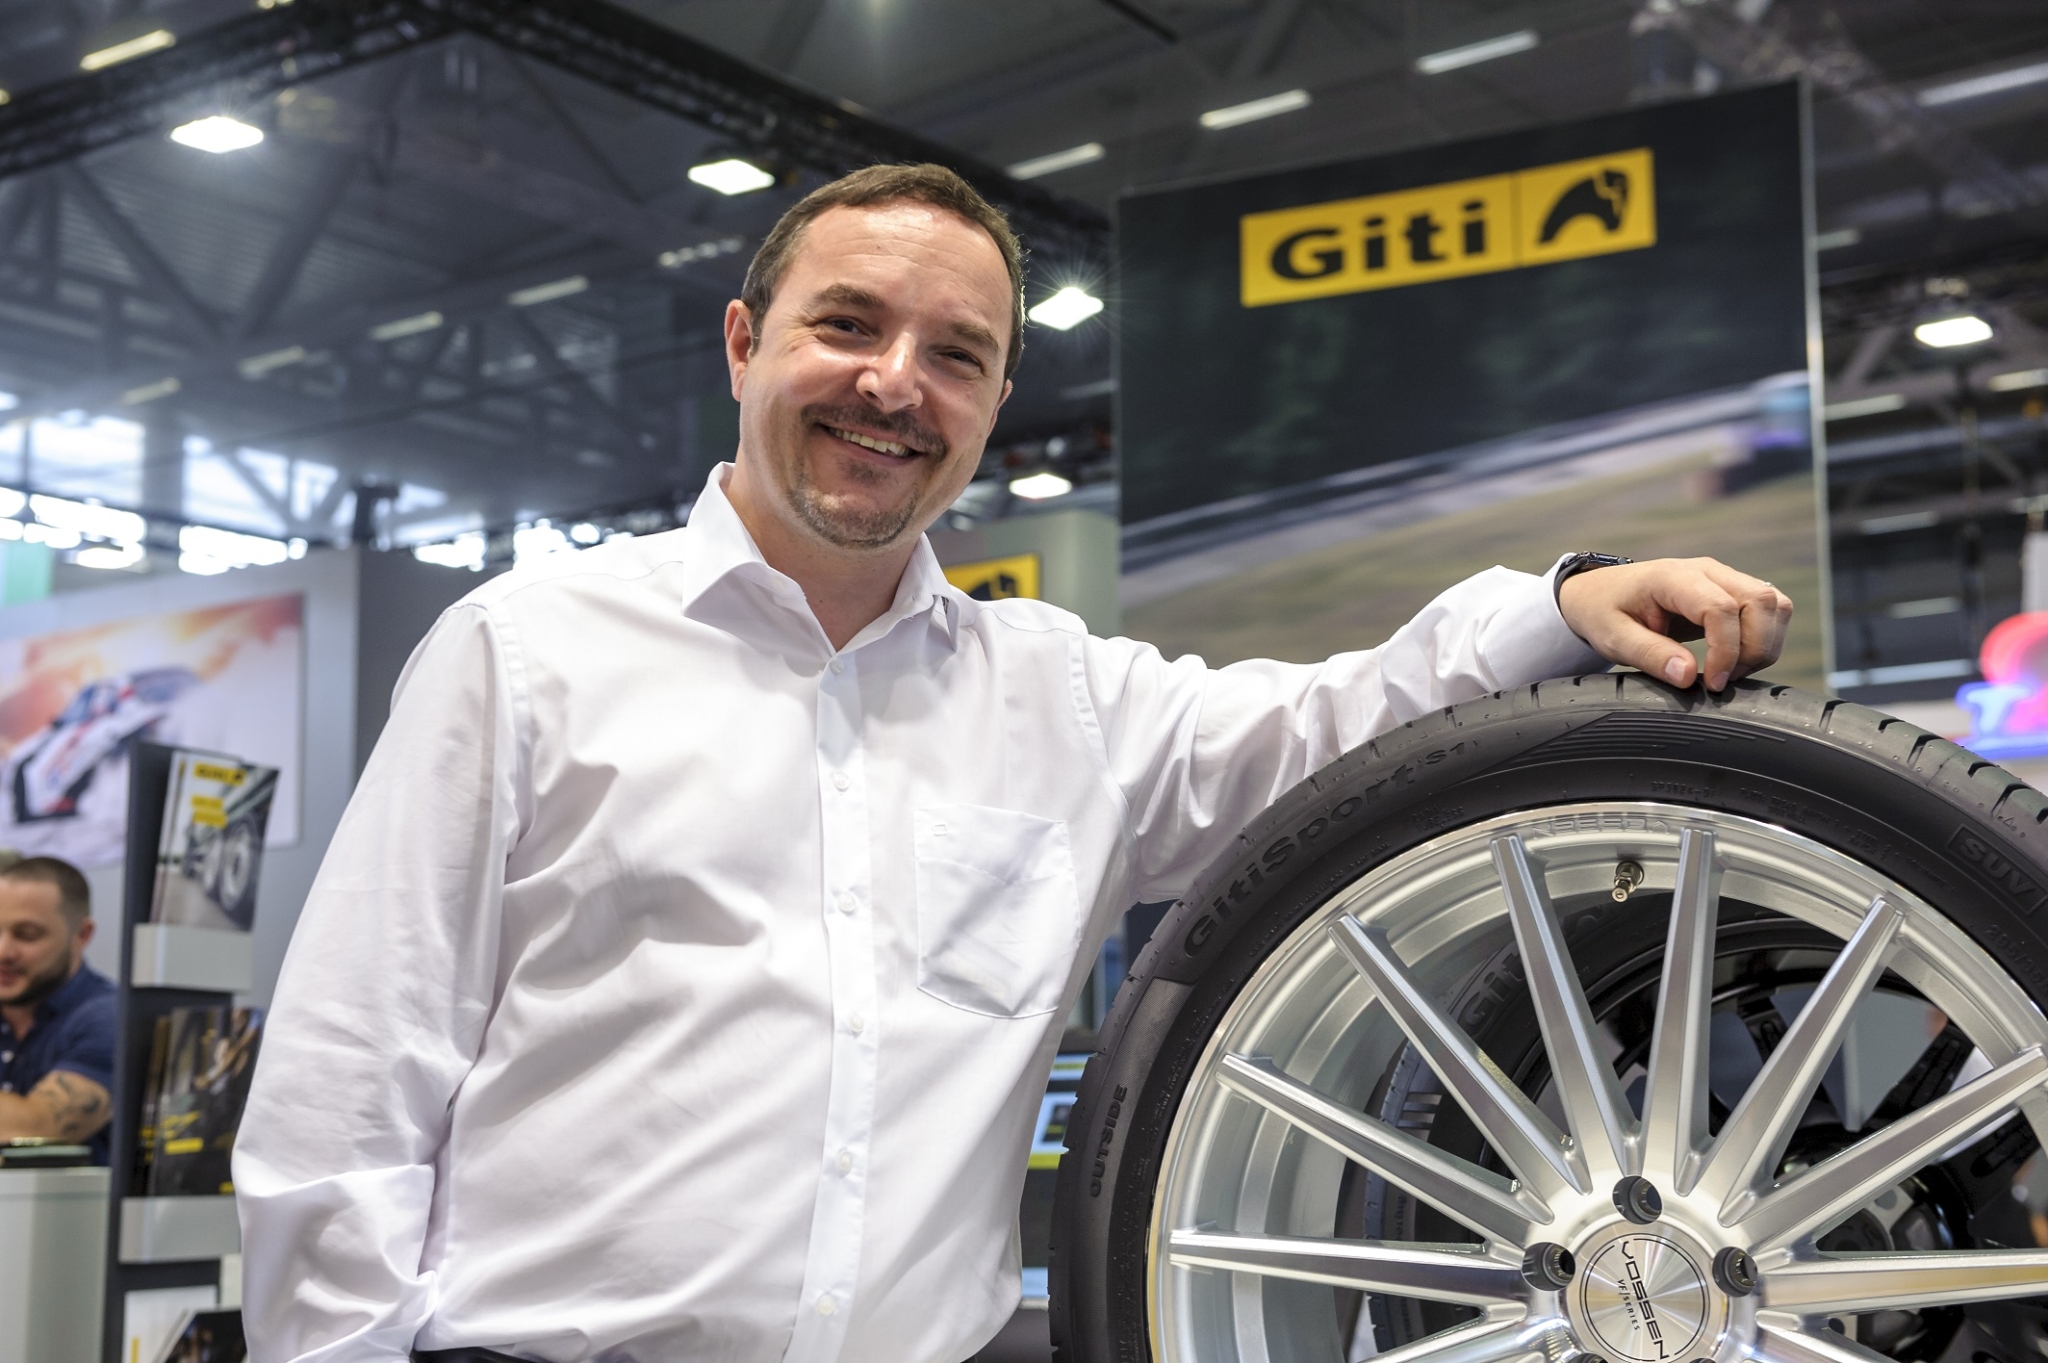 GitiSynergyH2 tyre ADAC ‘Good’ rating ‘an achievement to be celebrated’